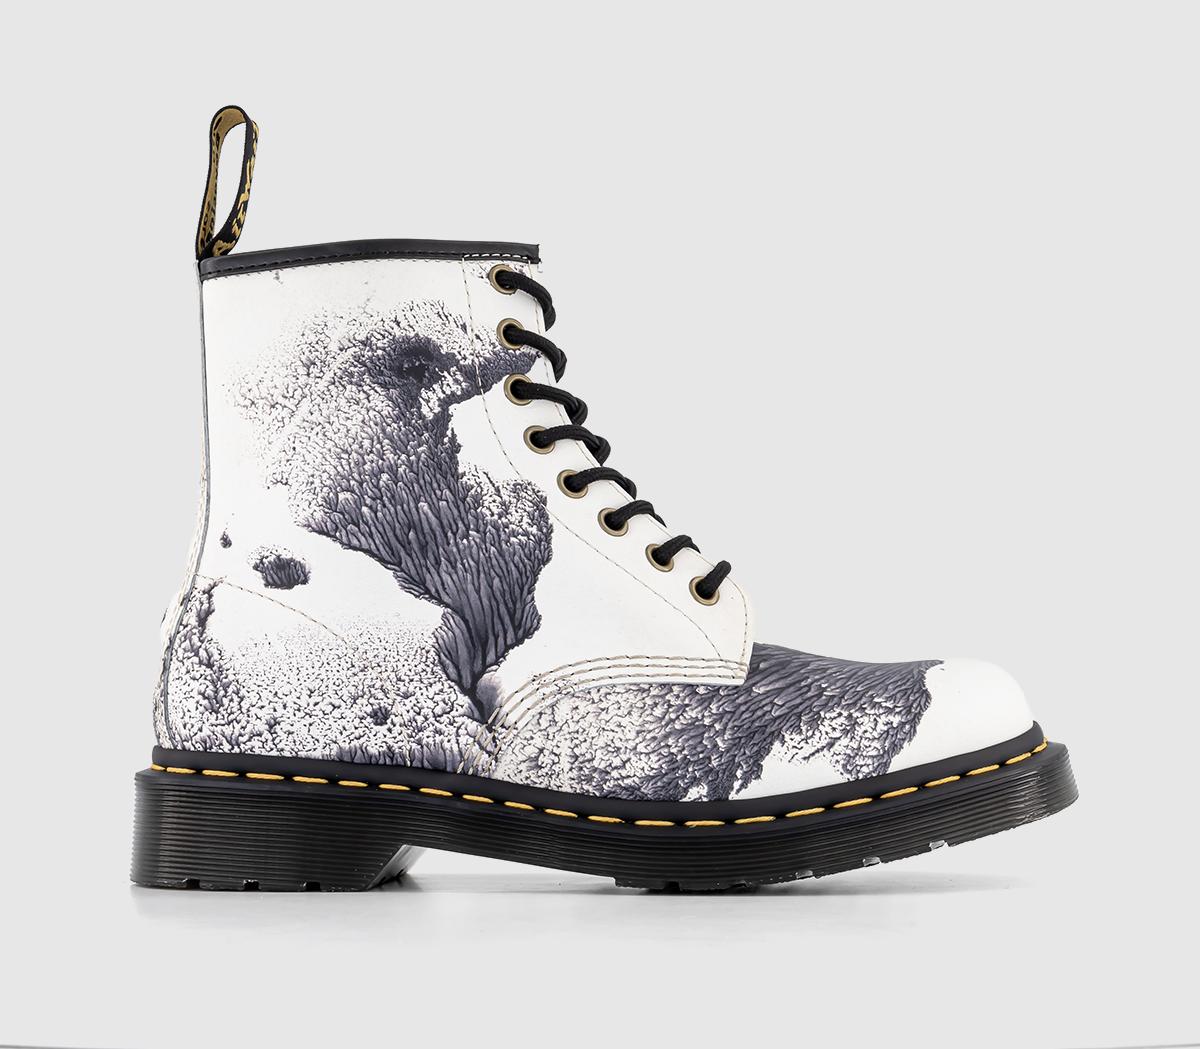 Dr. Martens1460 Tate BootsDecal Muti